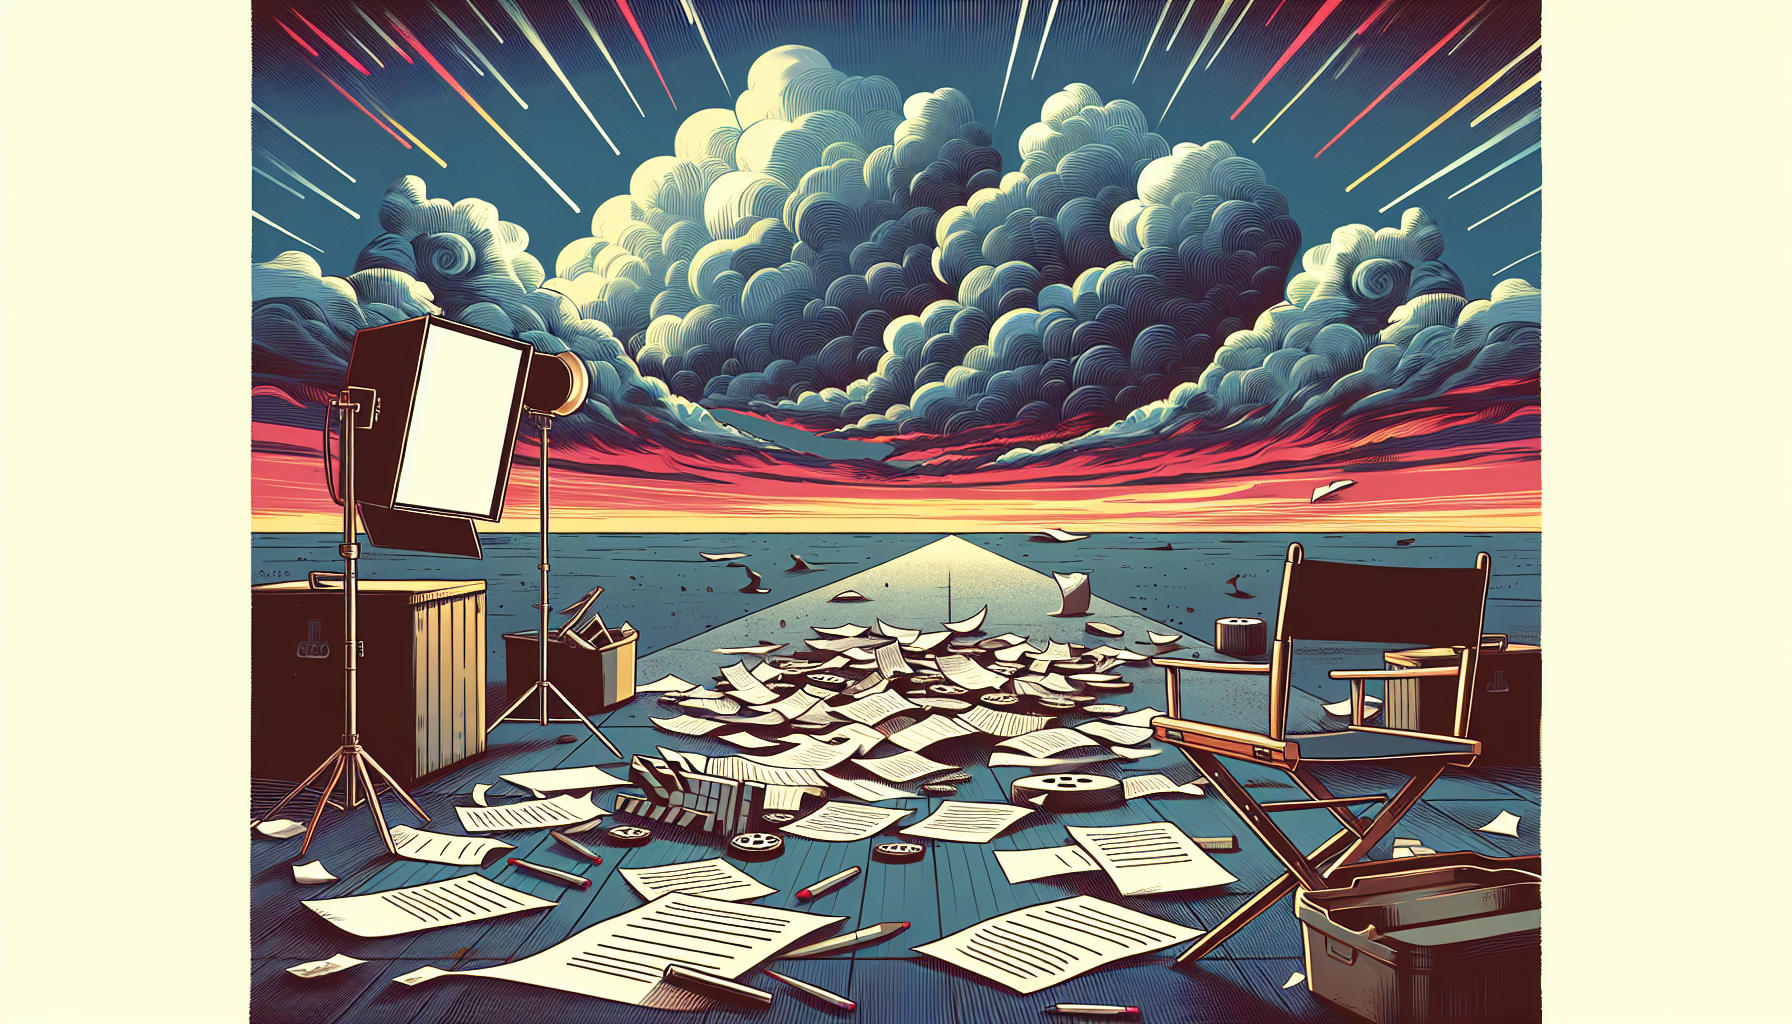 An artistic illustration of a deserted film set with abandoned scripts scattered on the ground, under a dramatic cloudy sky, symbolizing the impact of the screenwriter strike.